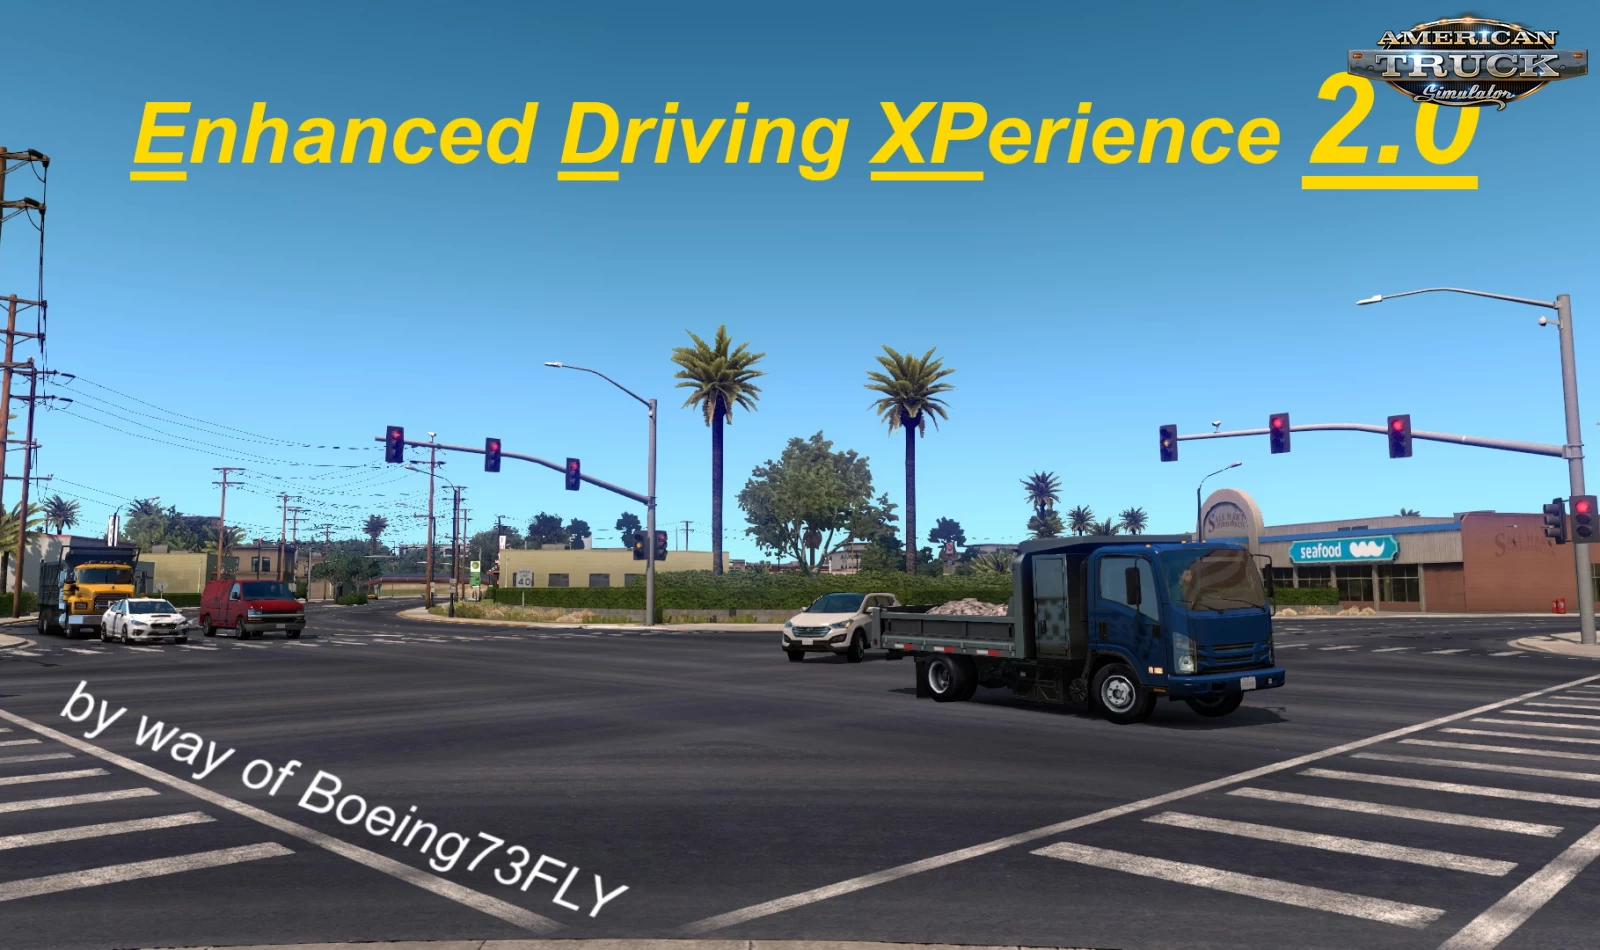 Enhanced Driving Experience (EDXP) v2.0 by Boeing73FLY (1.39.x)